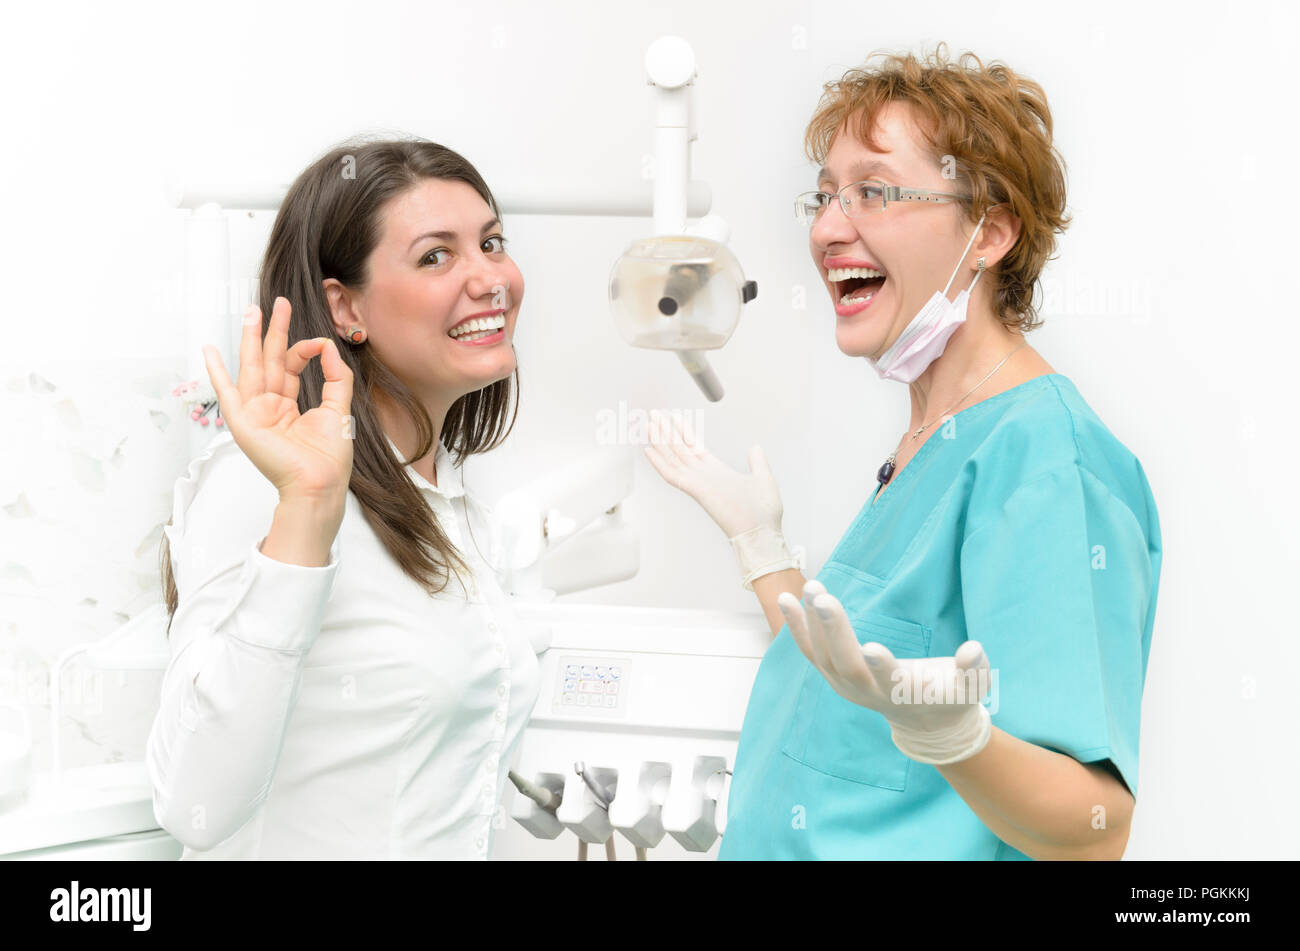 A happy young woman after dentist visit Stock Photo